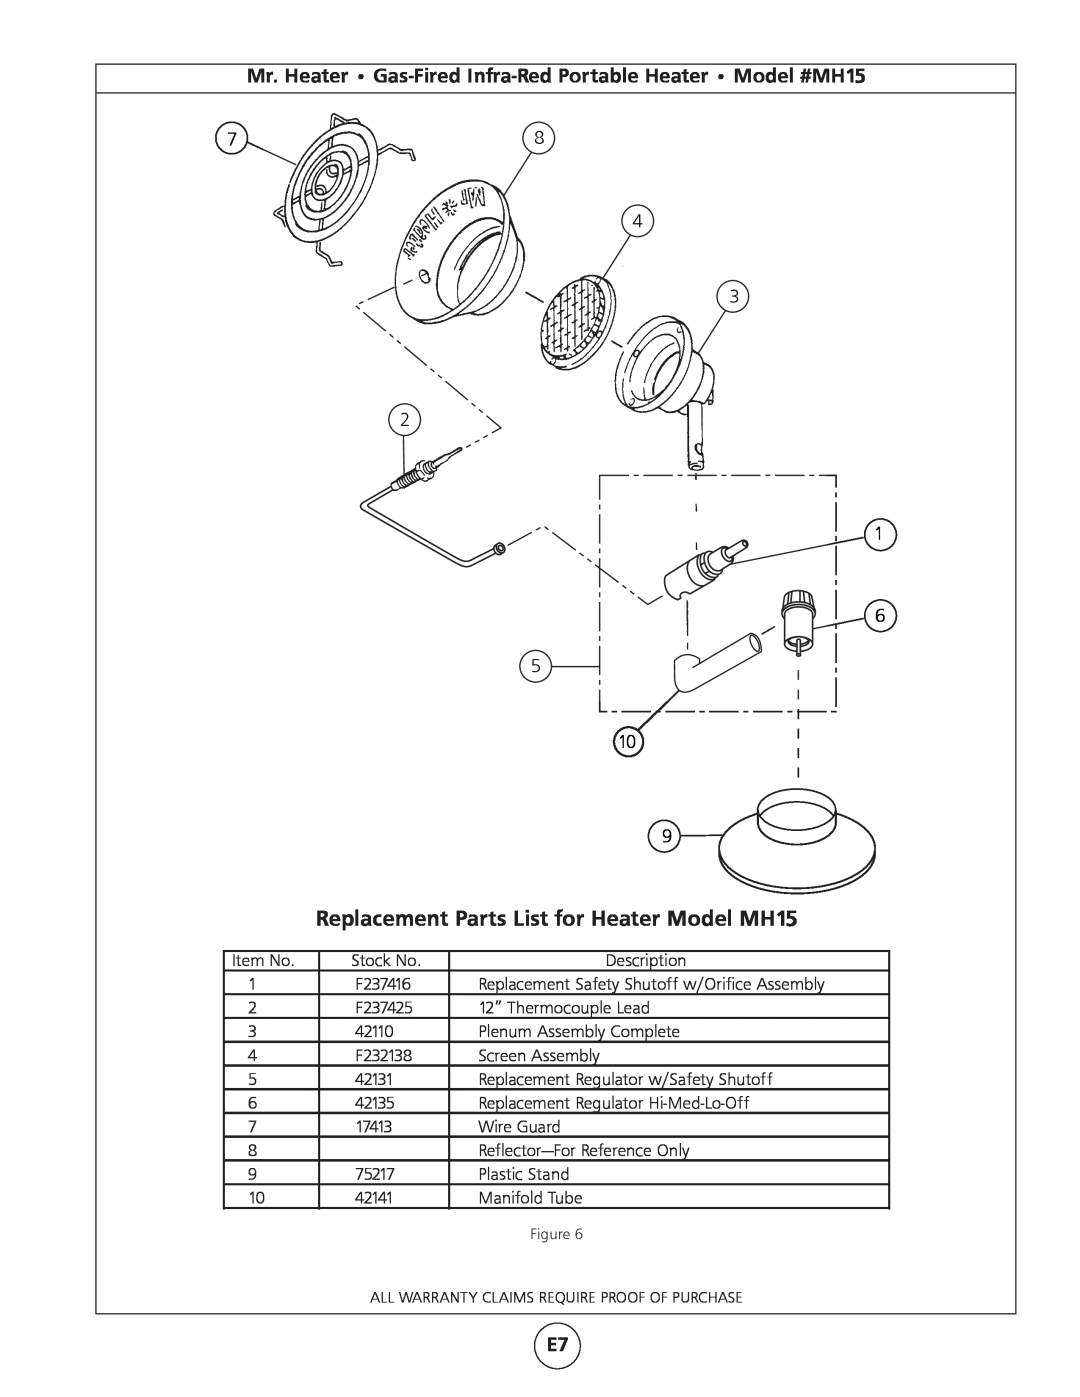 Mr. Heater operating instructions Replacement Parts List for Heater Model MH15, 4 3 2 5 